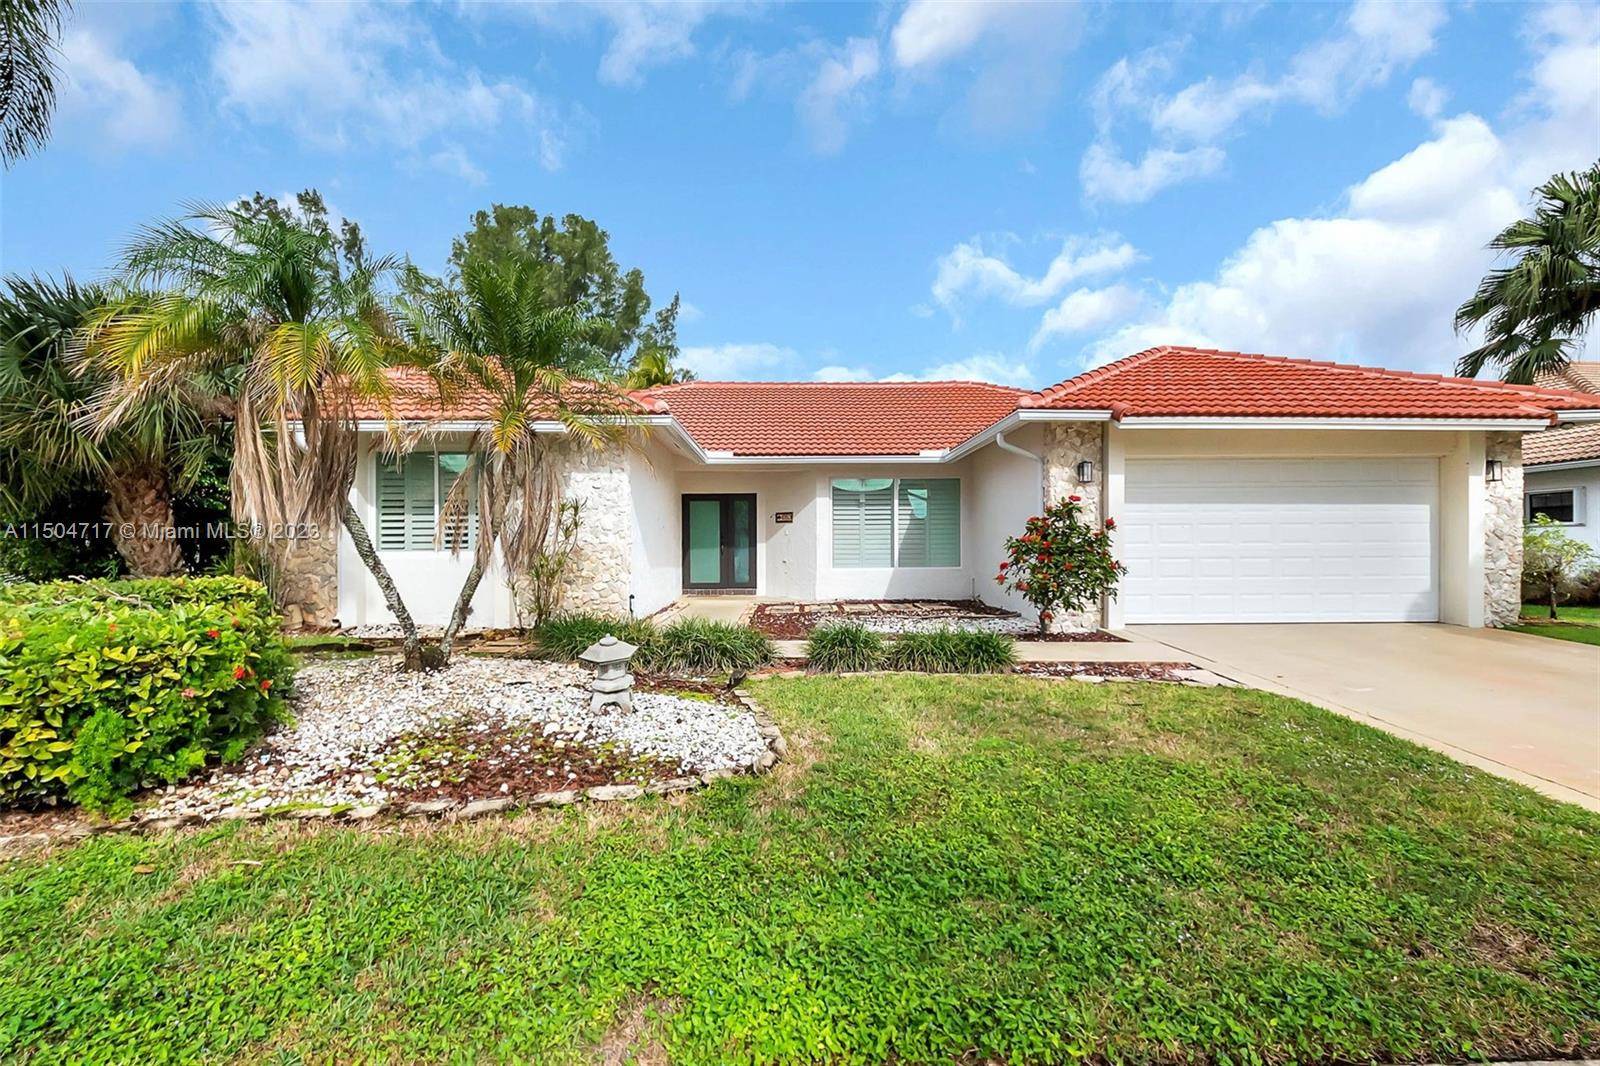 Exceptional opportunity to own this 3 2 pool home located within the prestigious highly sought after Boca Greens Golf Country Club in beautiful Boca Raton, FL.